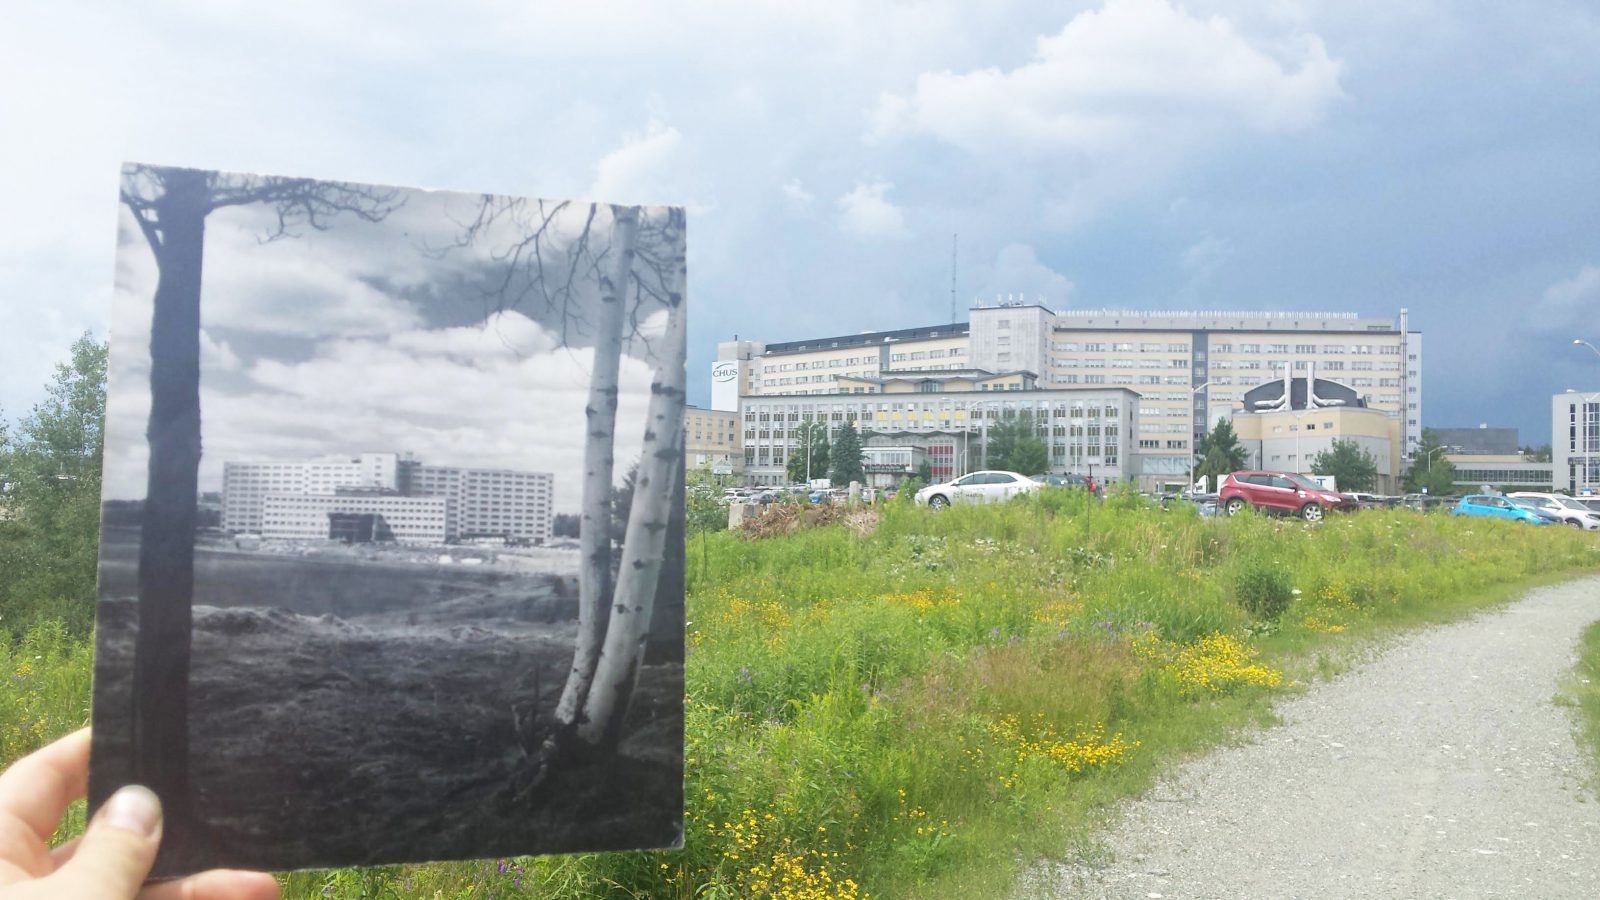 Sherbrooke then and now: The CHUS Fleurimont